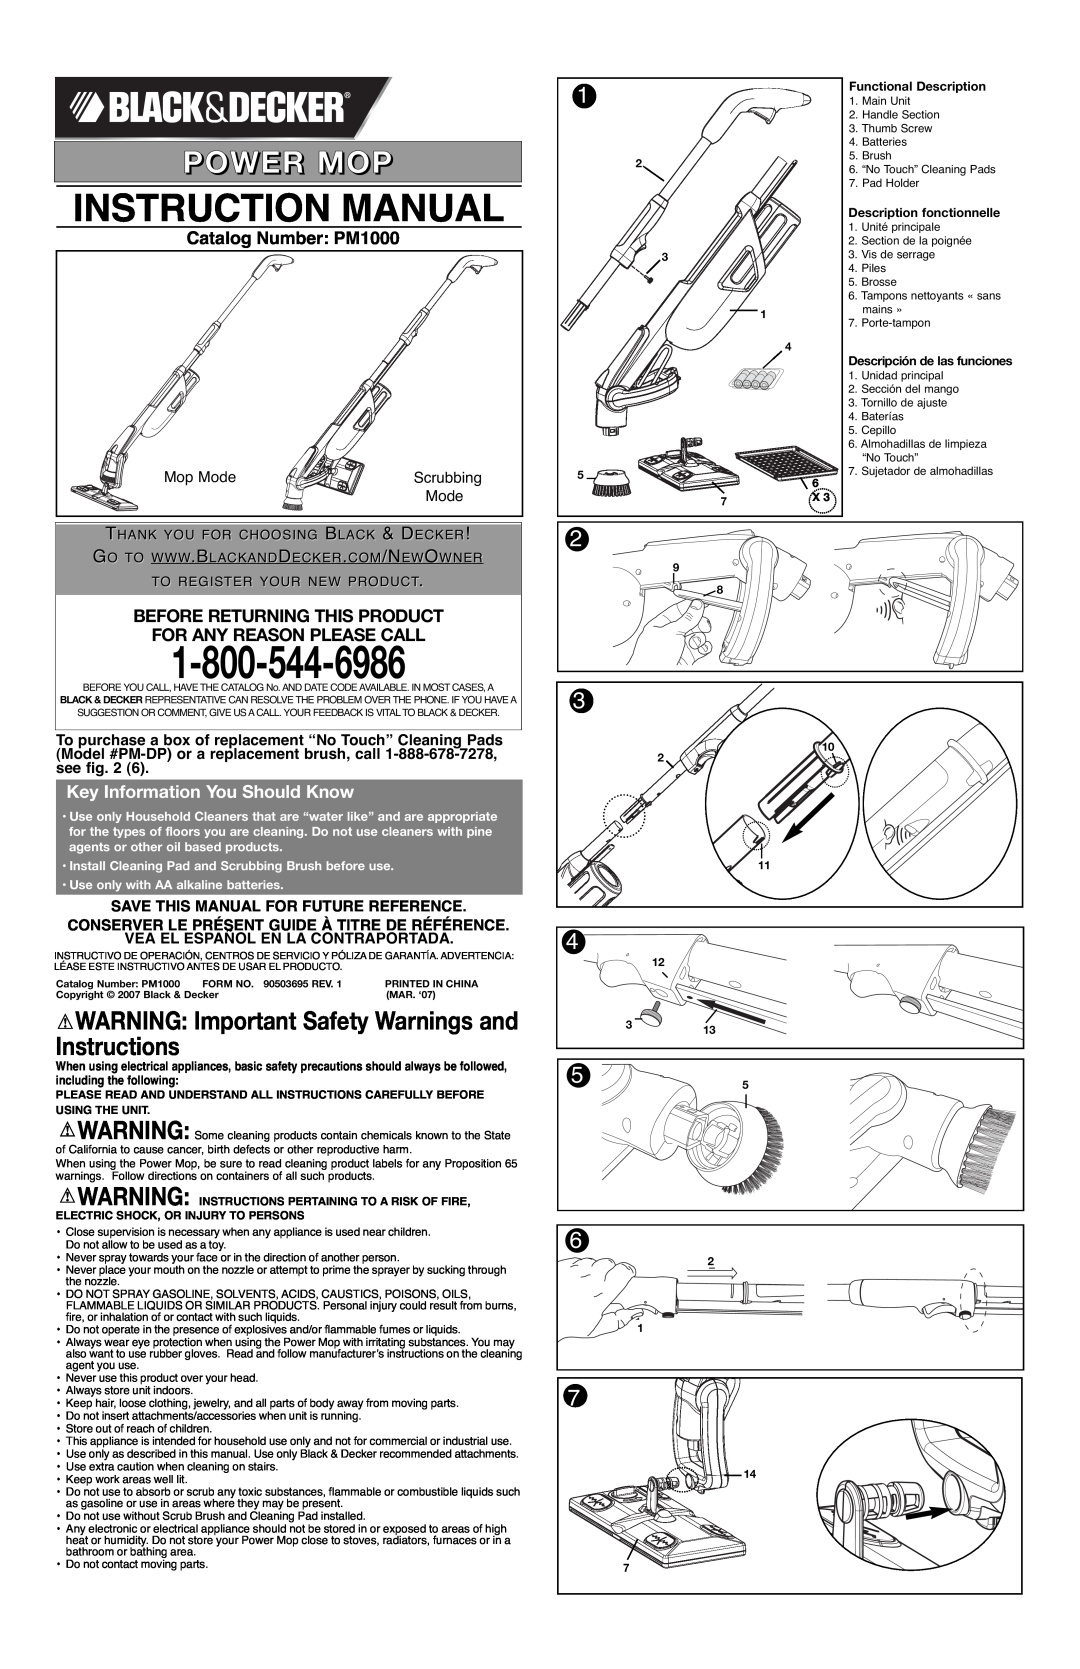 Black & Decker 90503695, PM1000 instruction manual Power Mop, WARNING Important Safety Warnings and Instructions, Mop Mode 